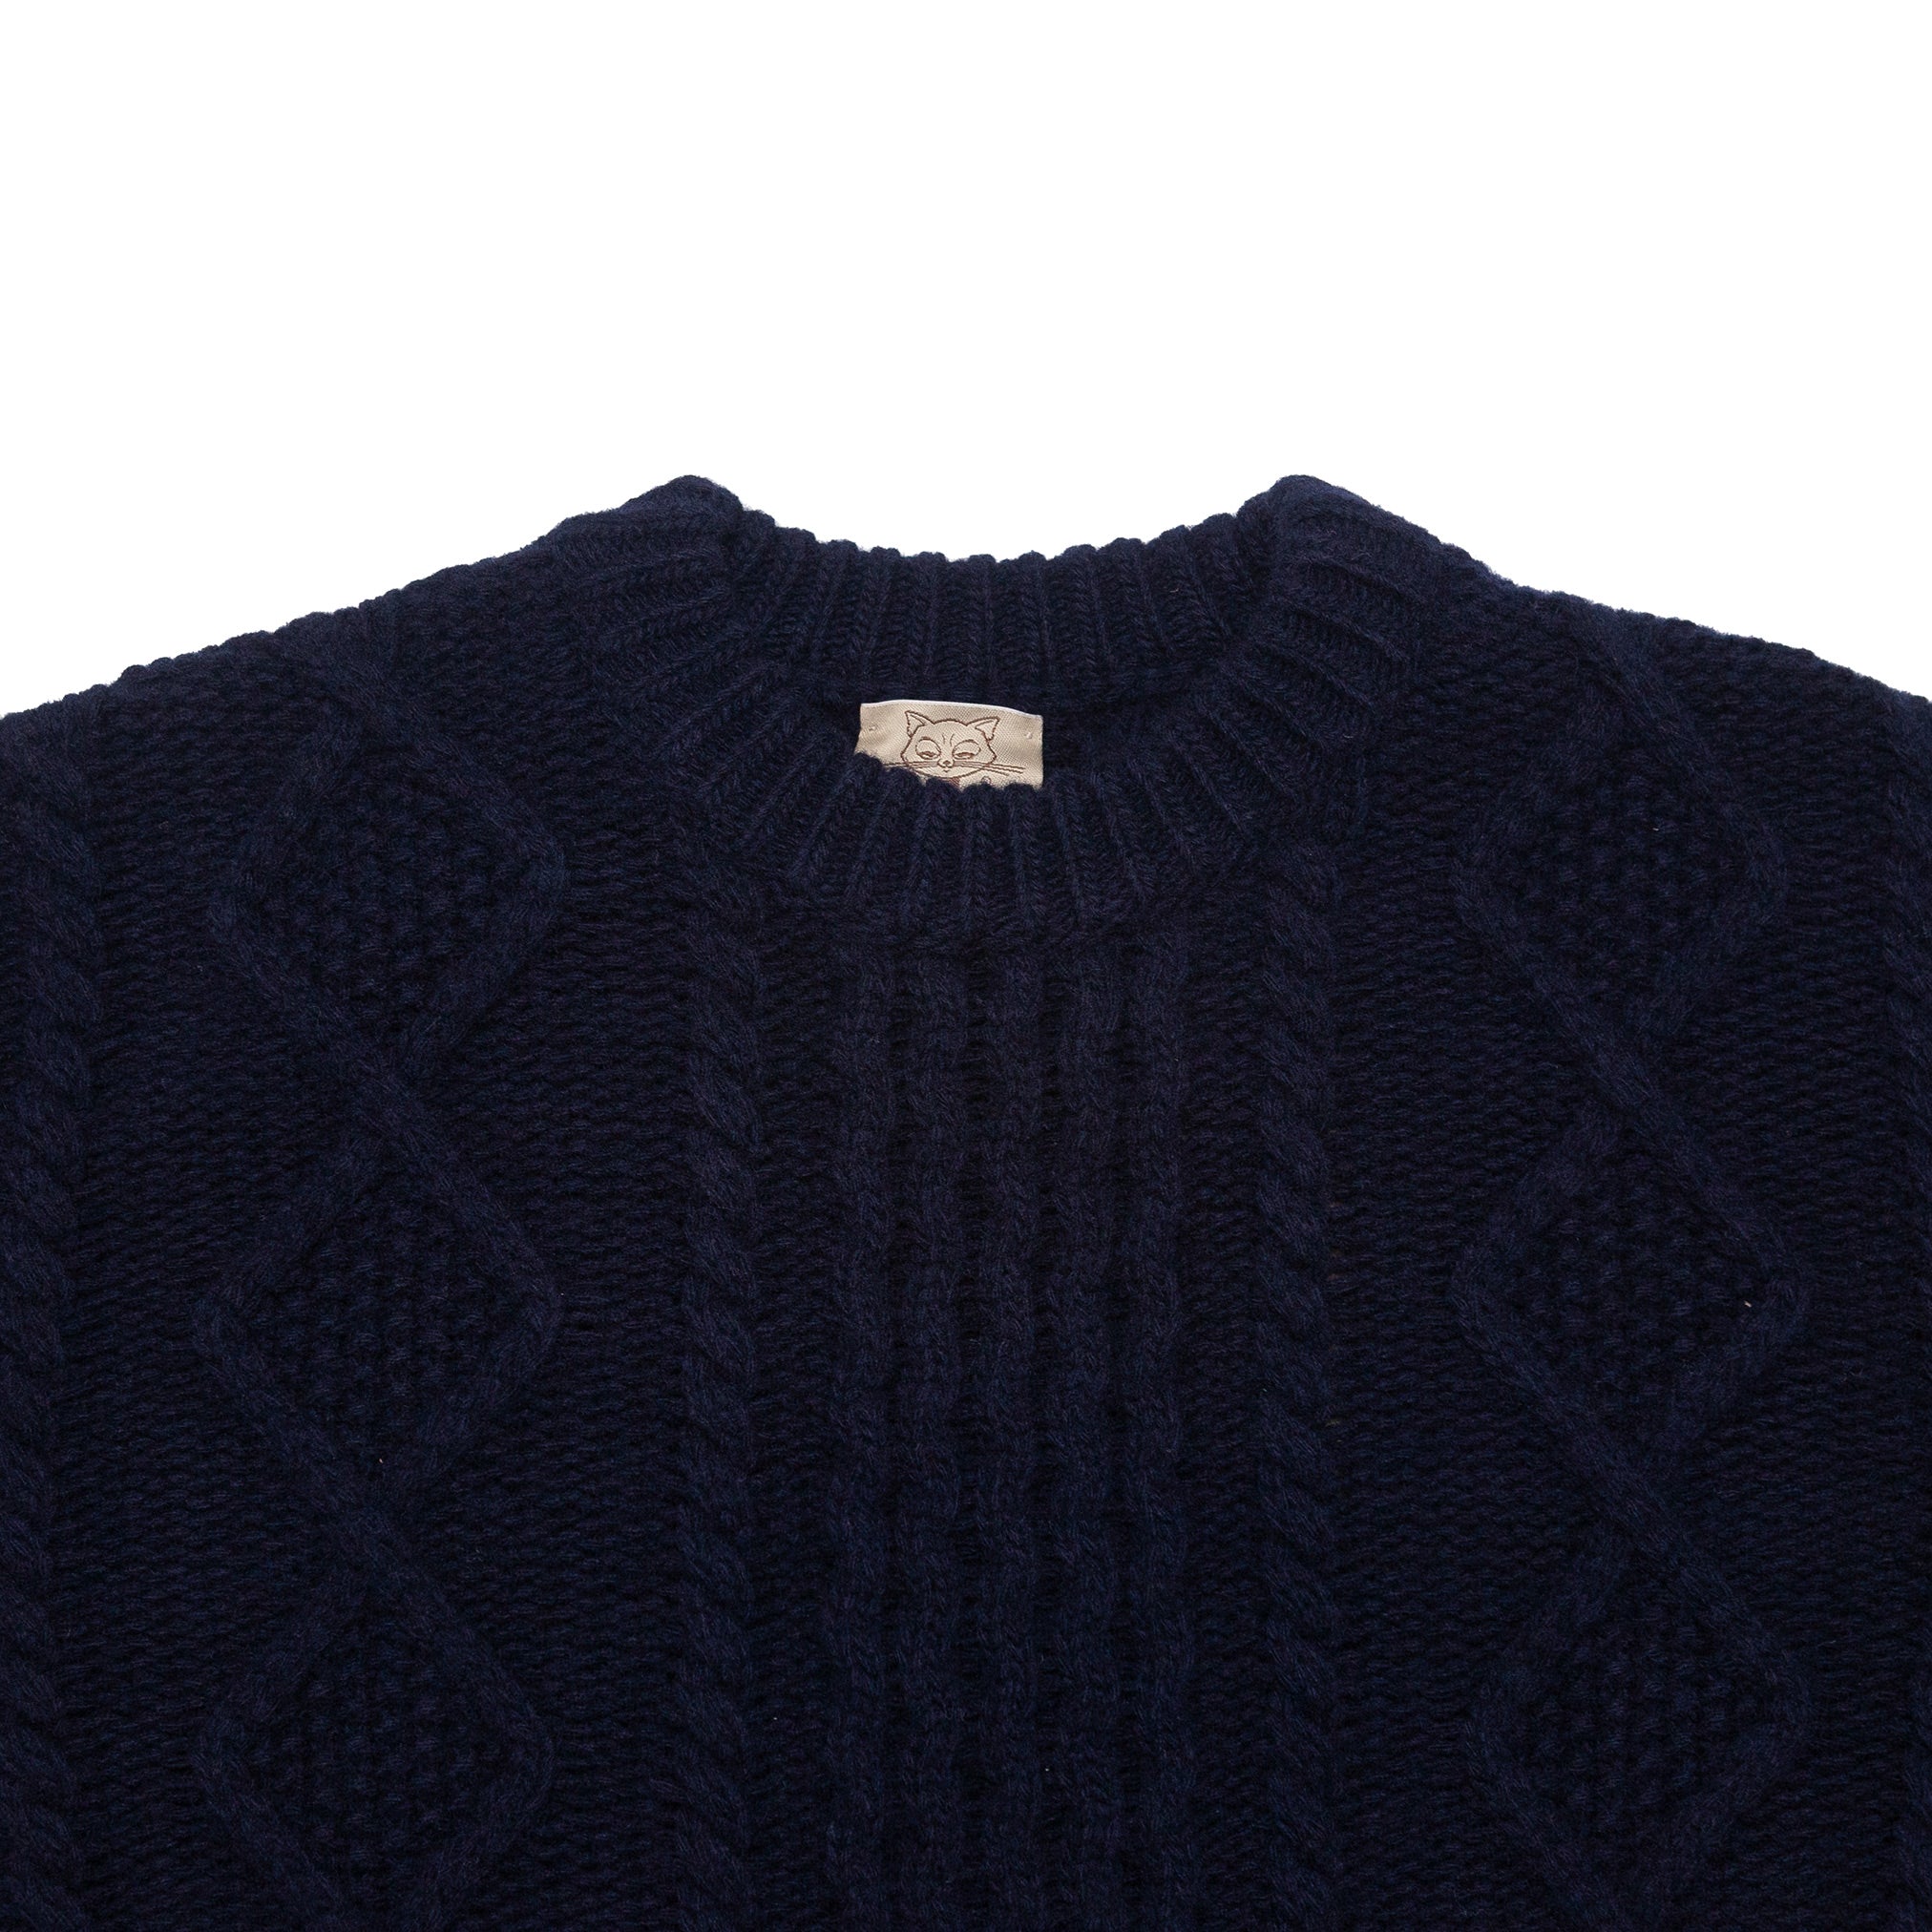 The King of Cool Sweater in Navy